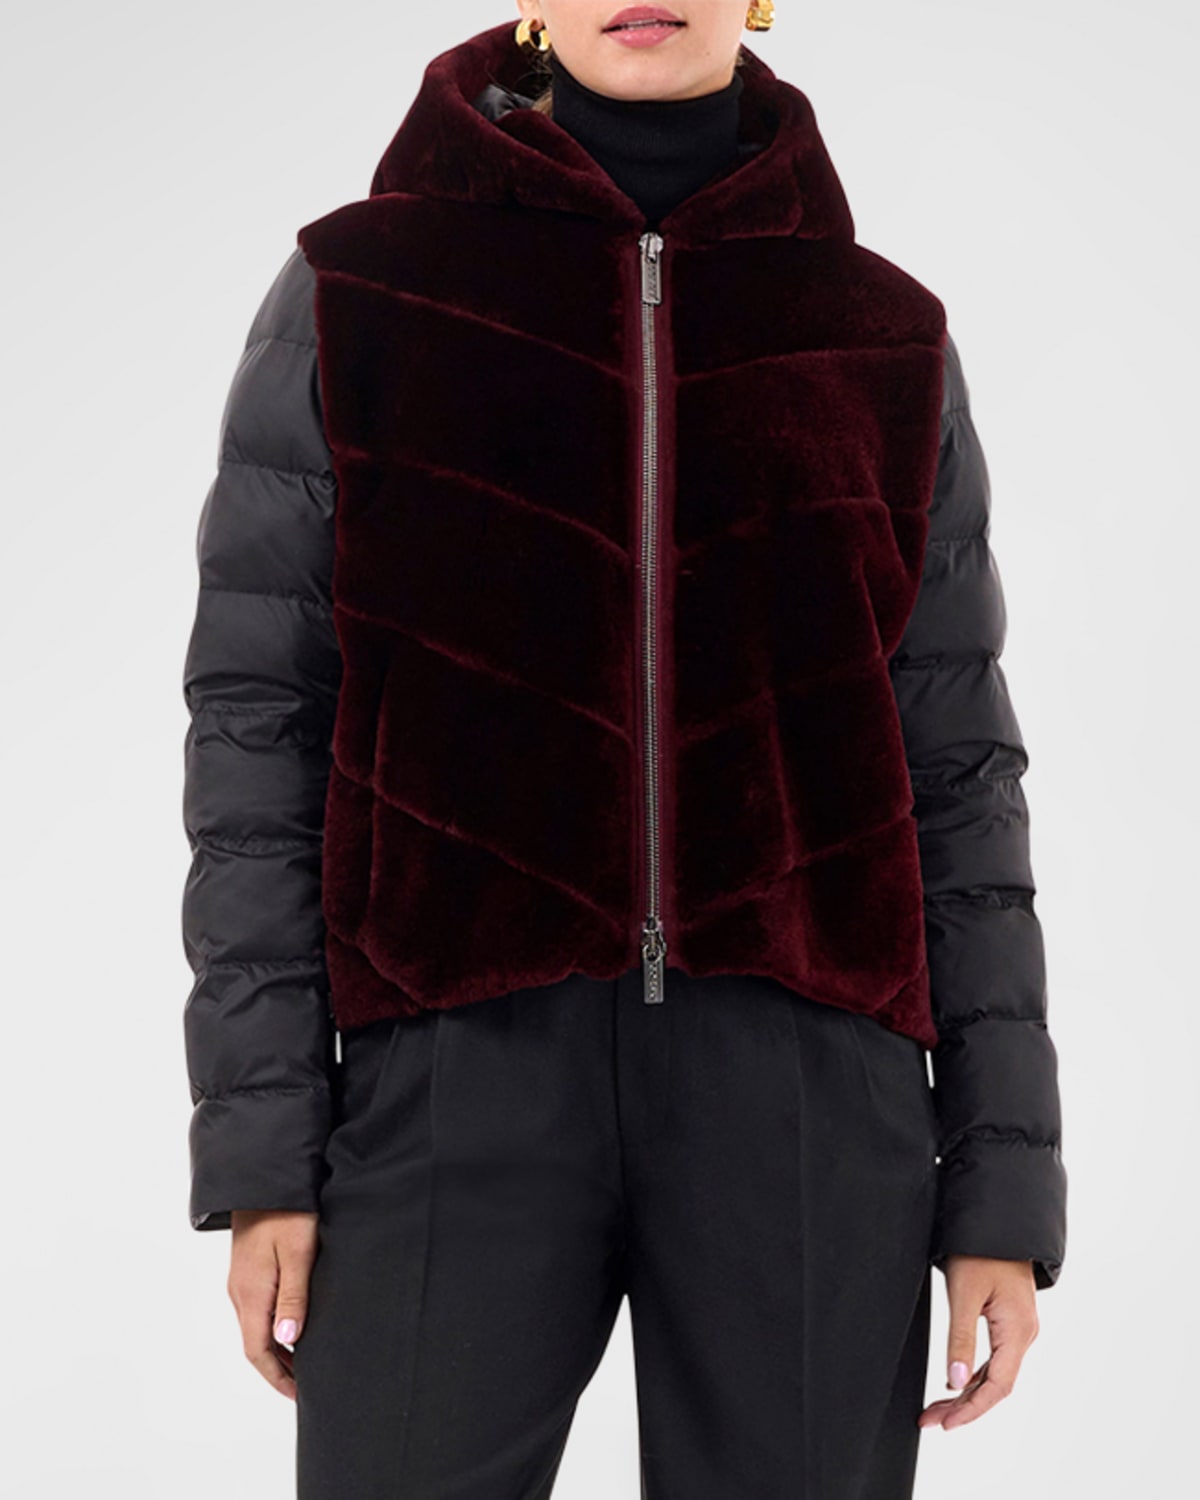 Gorski Chevron Lamb Shearling Parka w/ Quilted Sleeves And Back